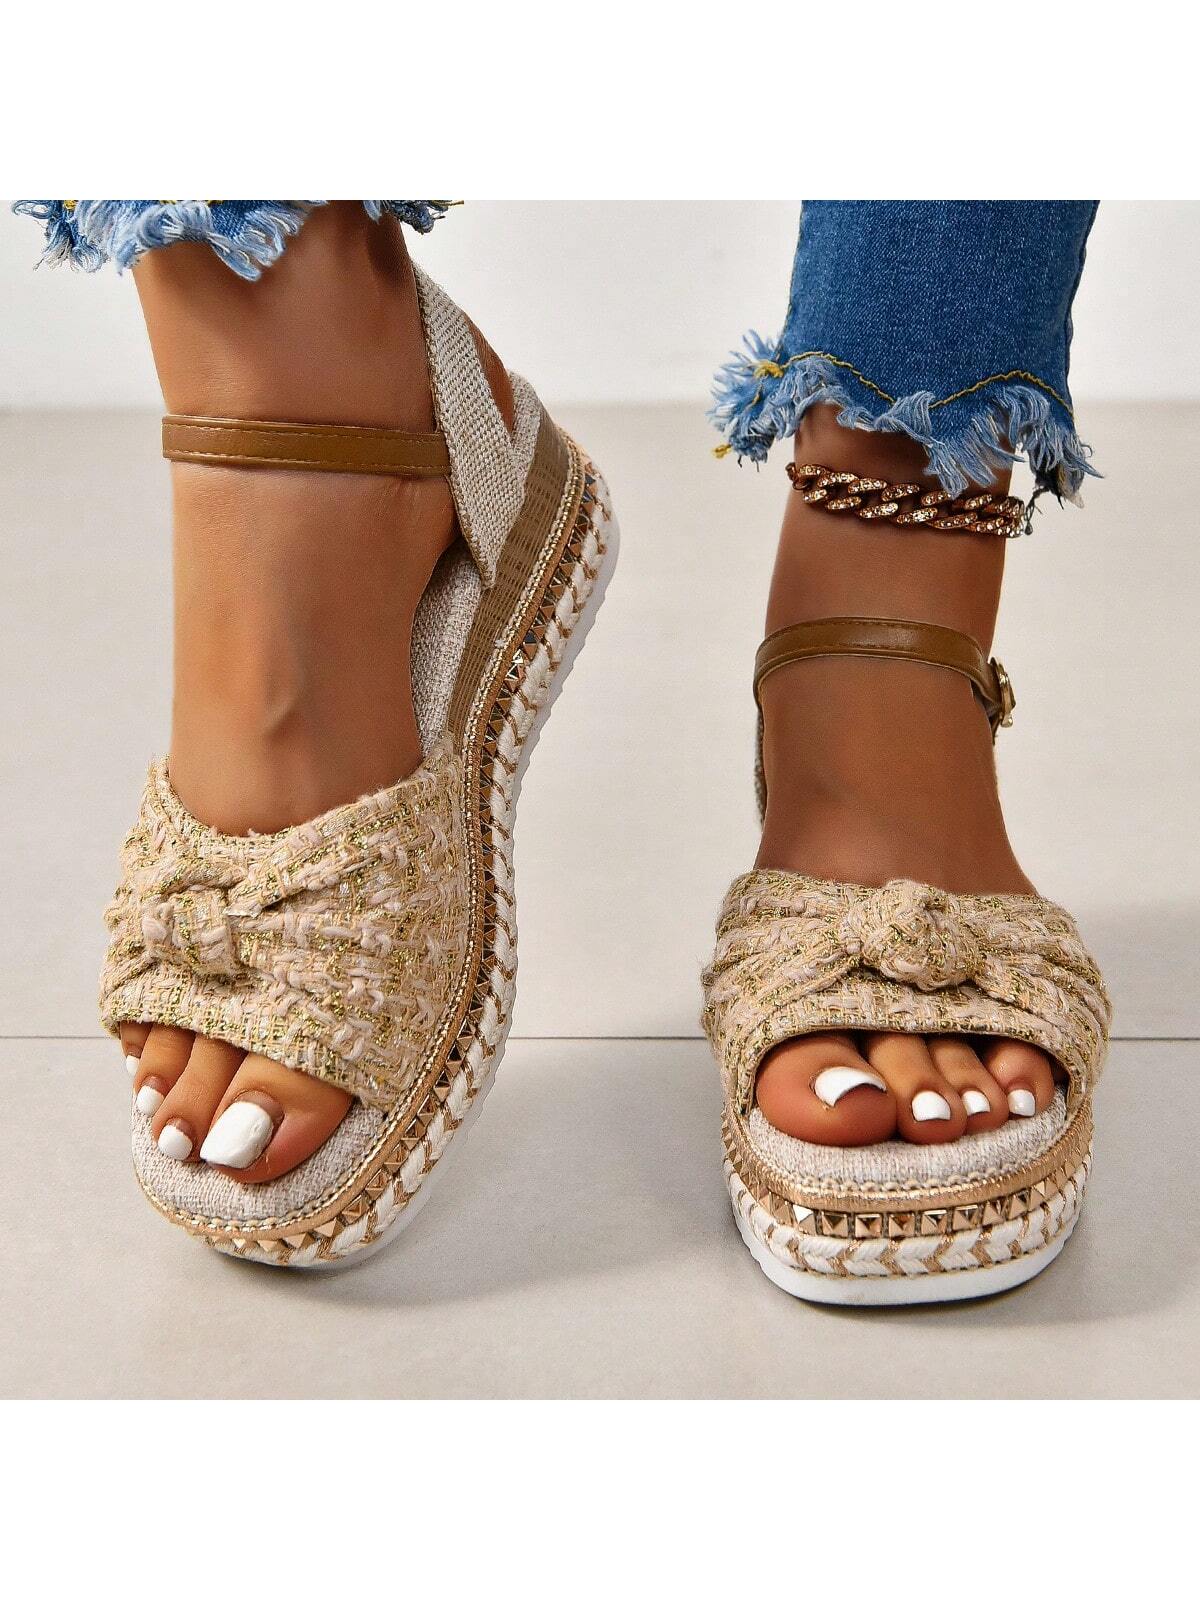 Fashionable Platform Knot Sandals, Stud and Rope Detail: Chic and Comfortable Fit